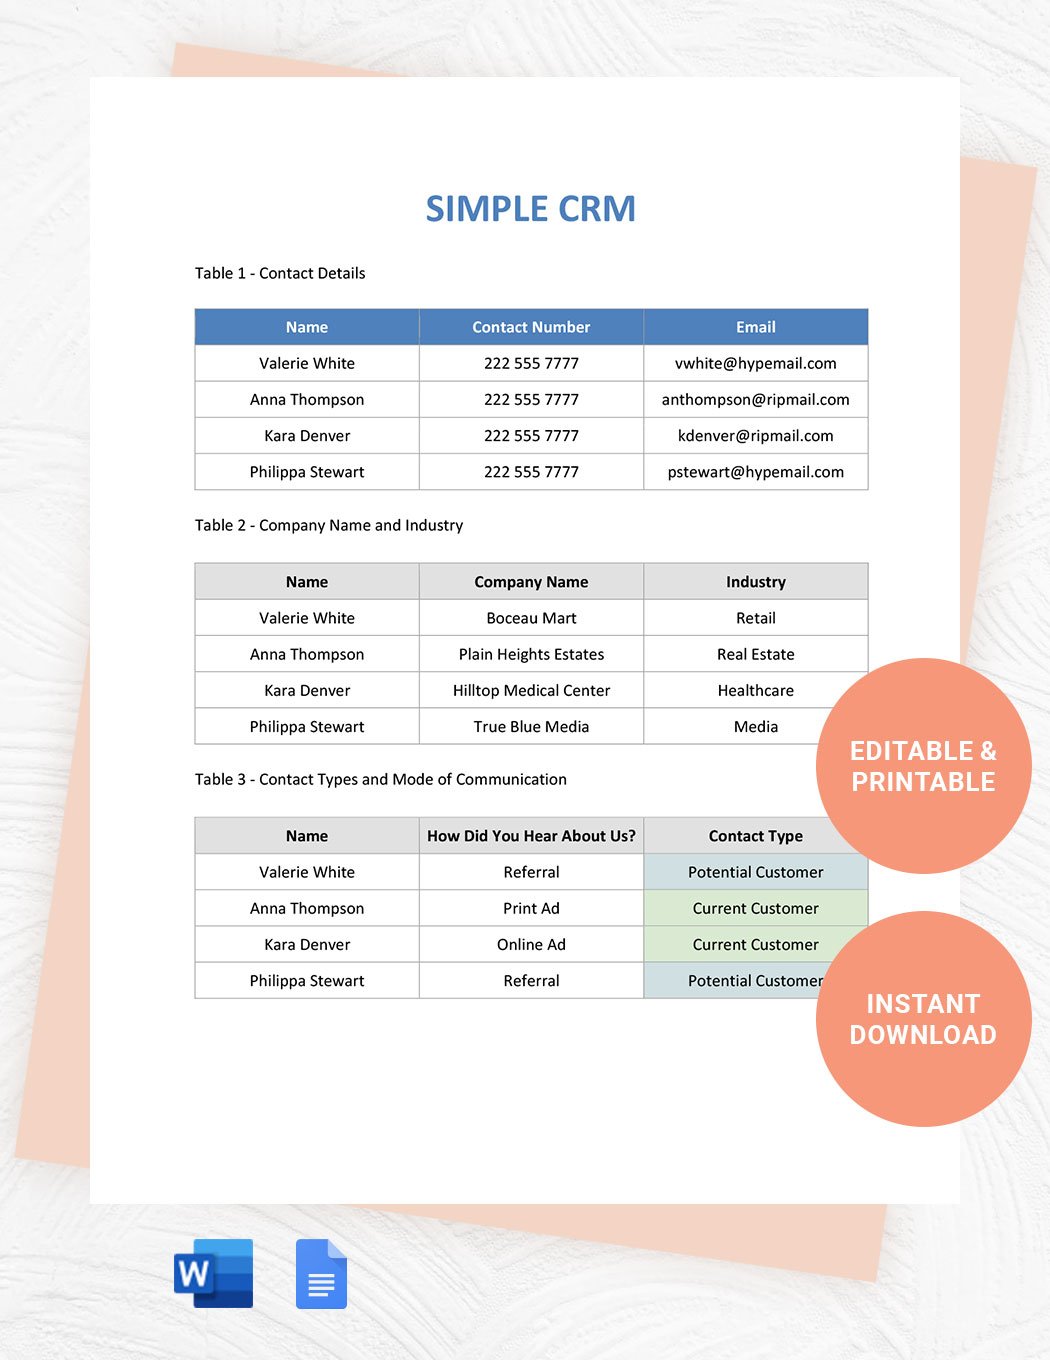 Simple CRM Template in Word, Google Docs